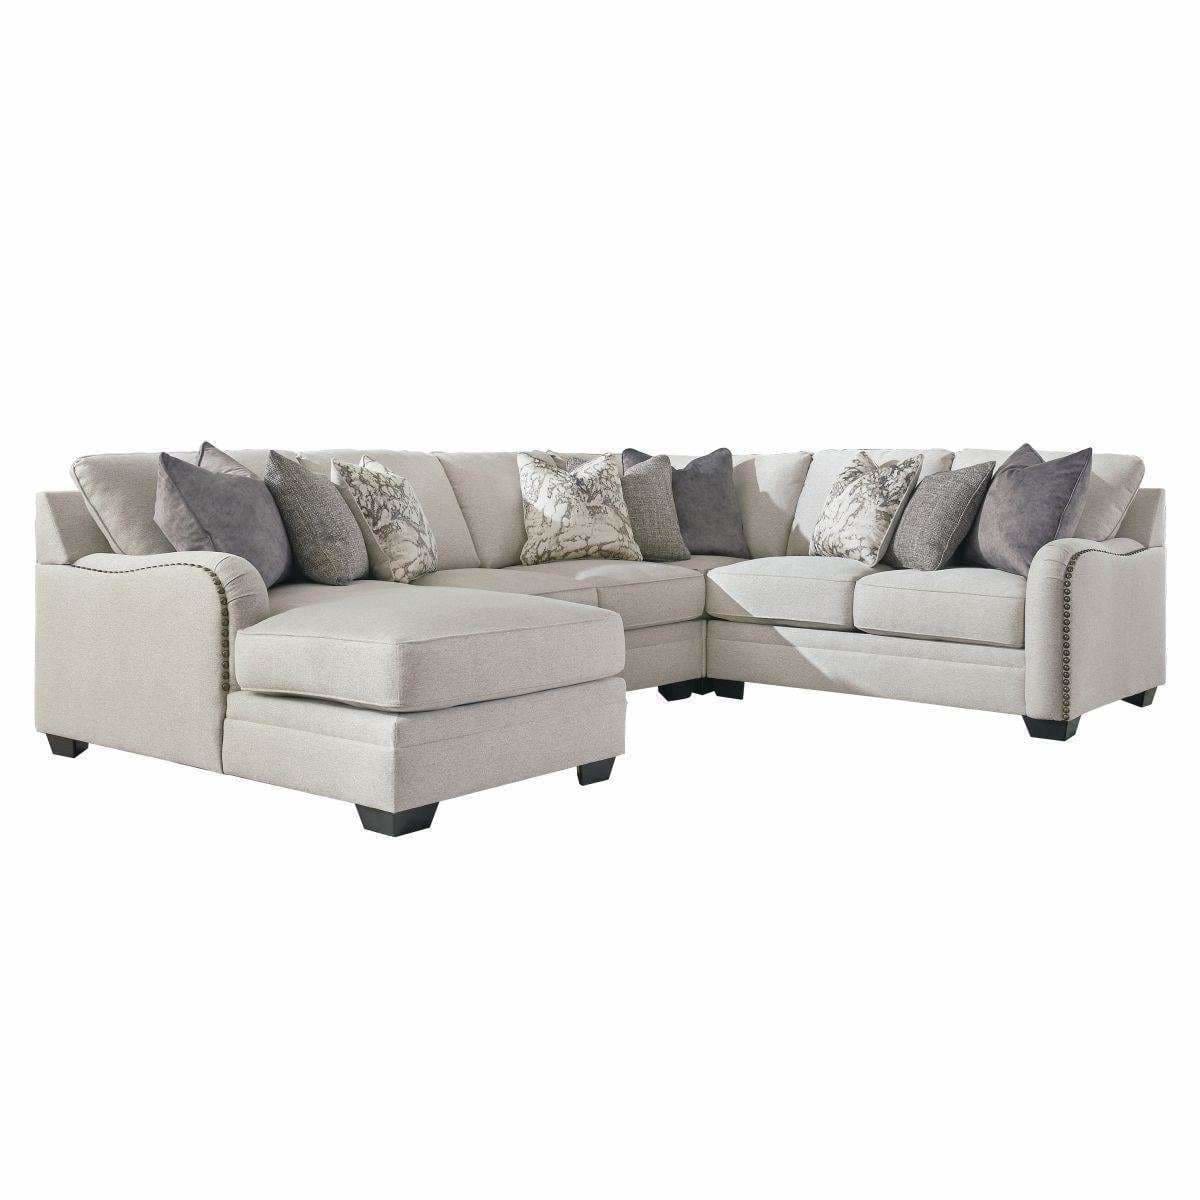 Dellara Four Piece Sectional - Sectional